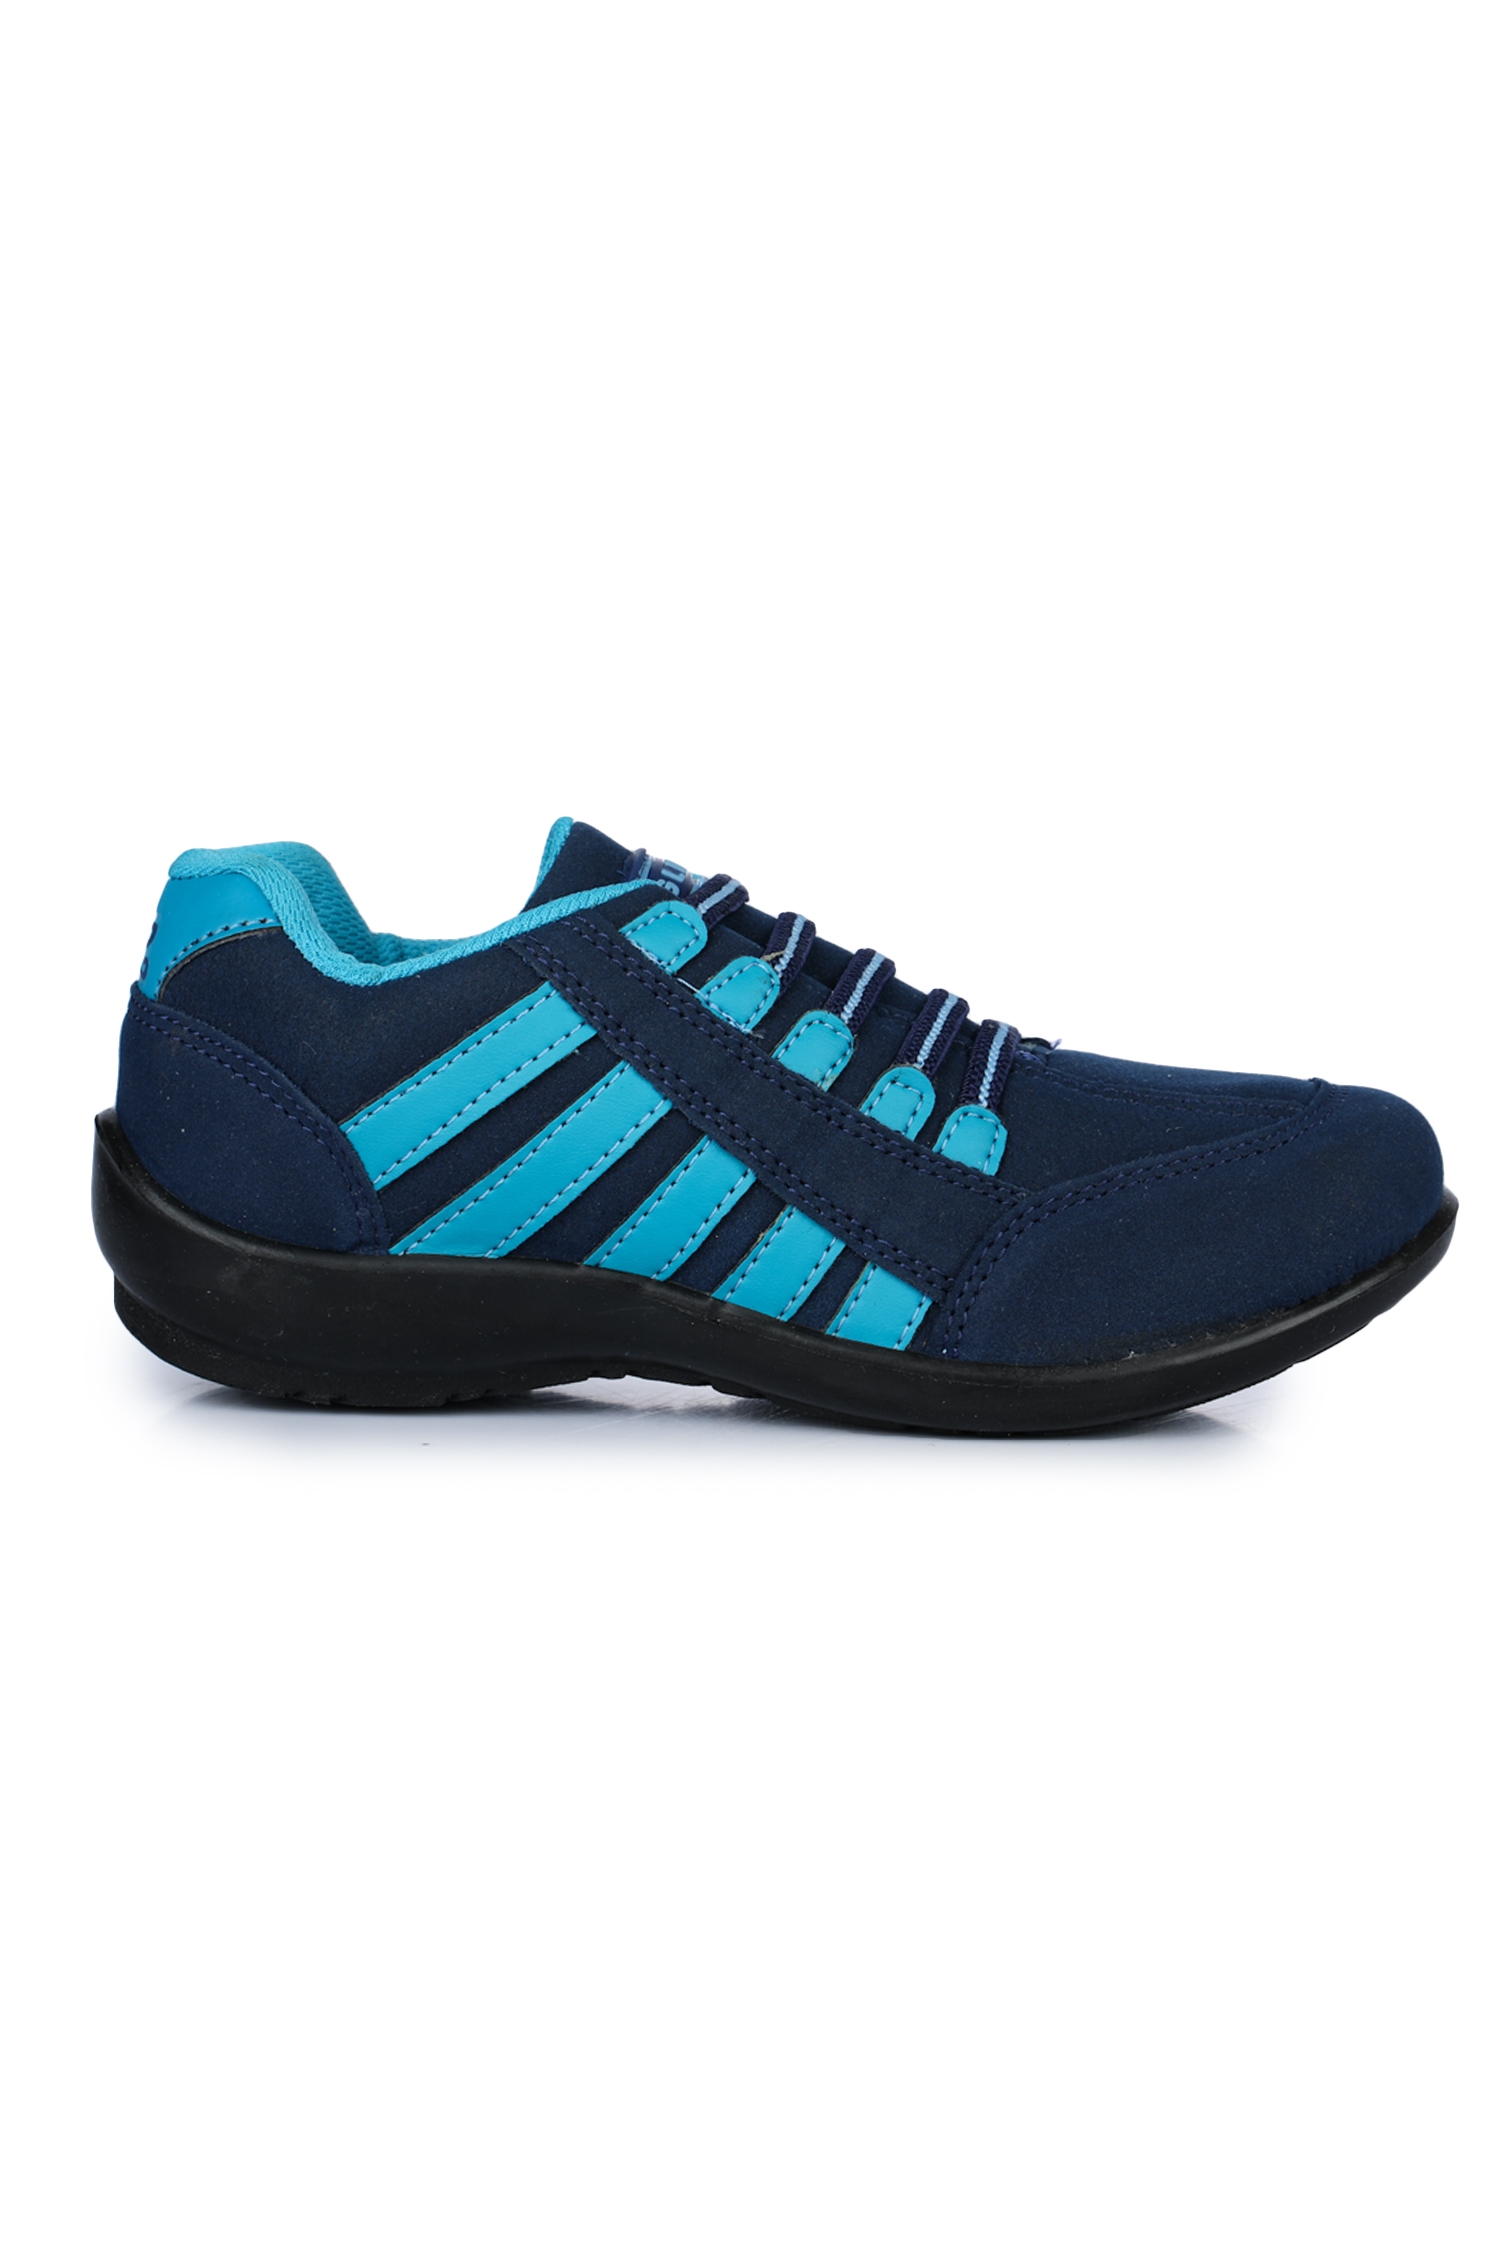 Gliders by Liberty Blue Running Shoes